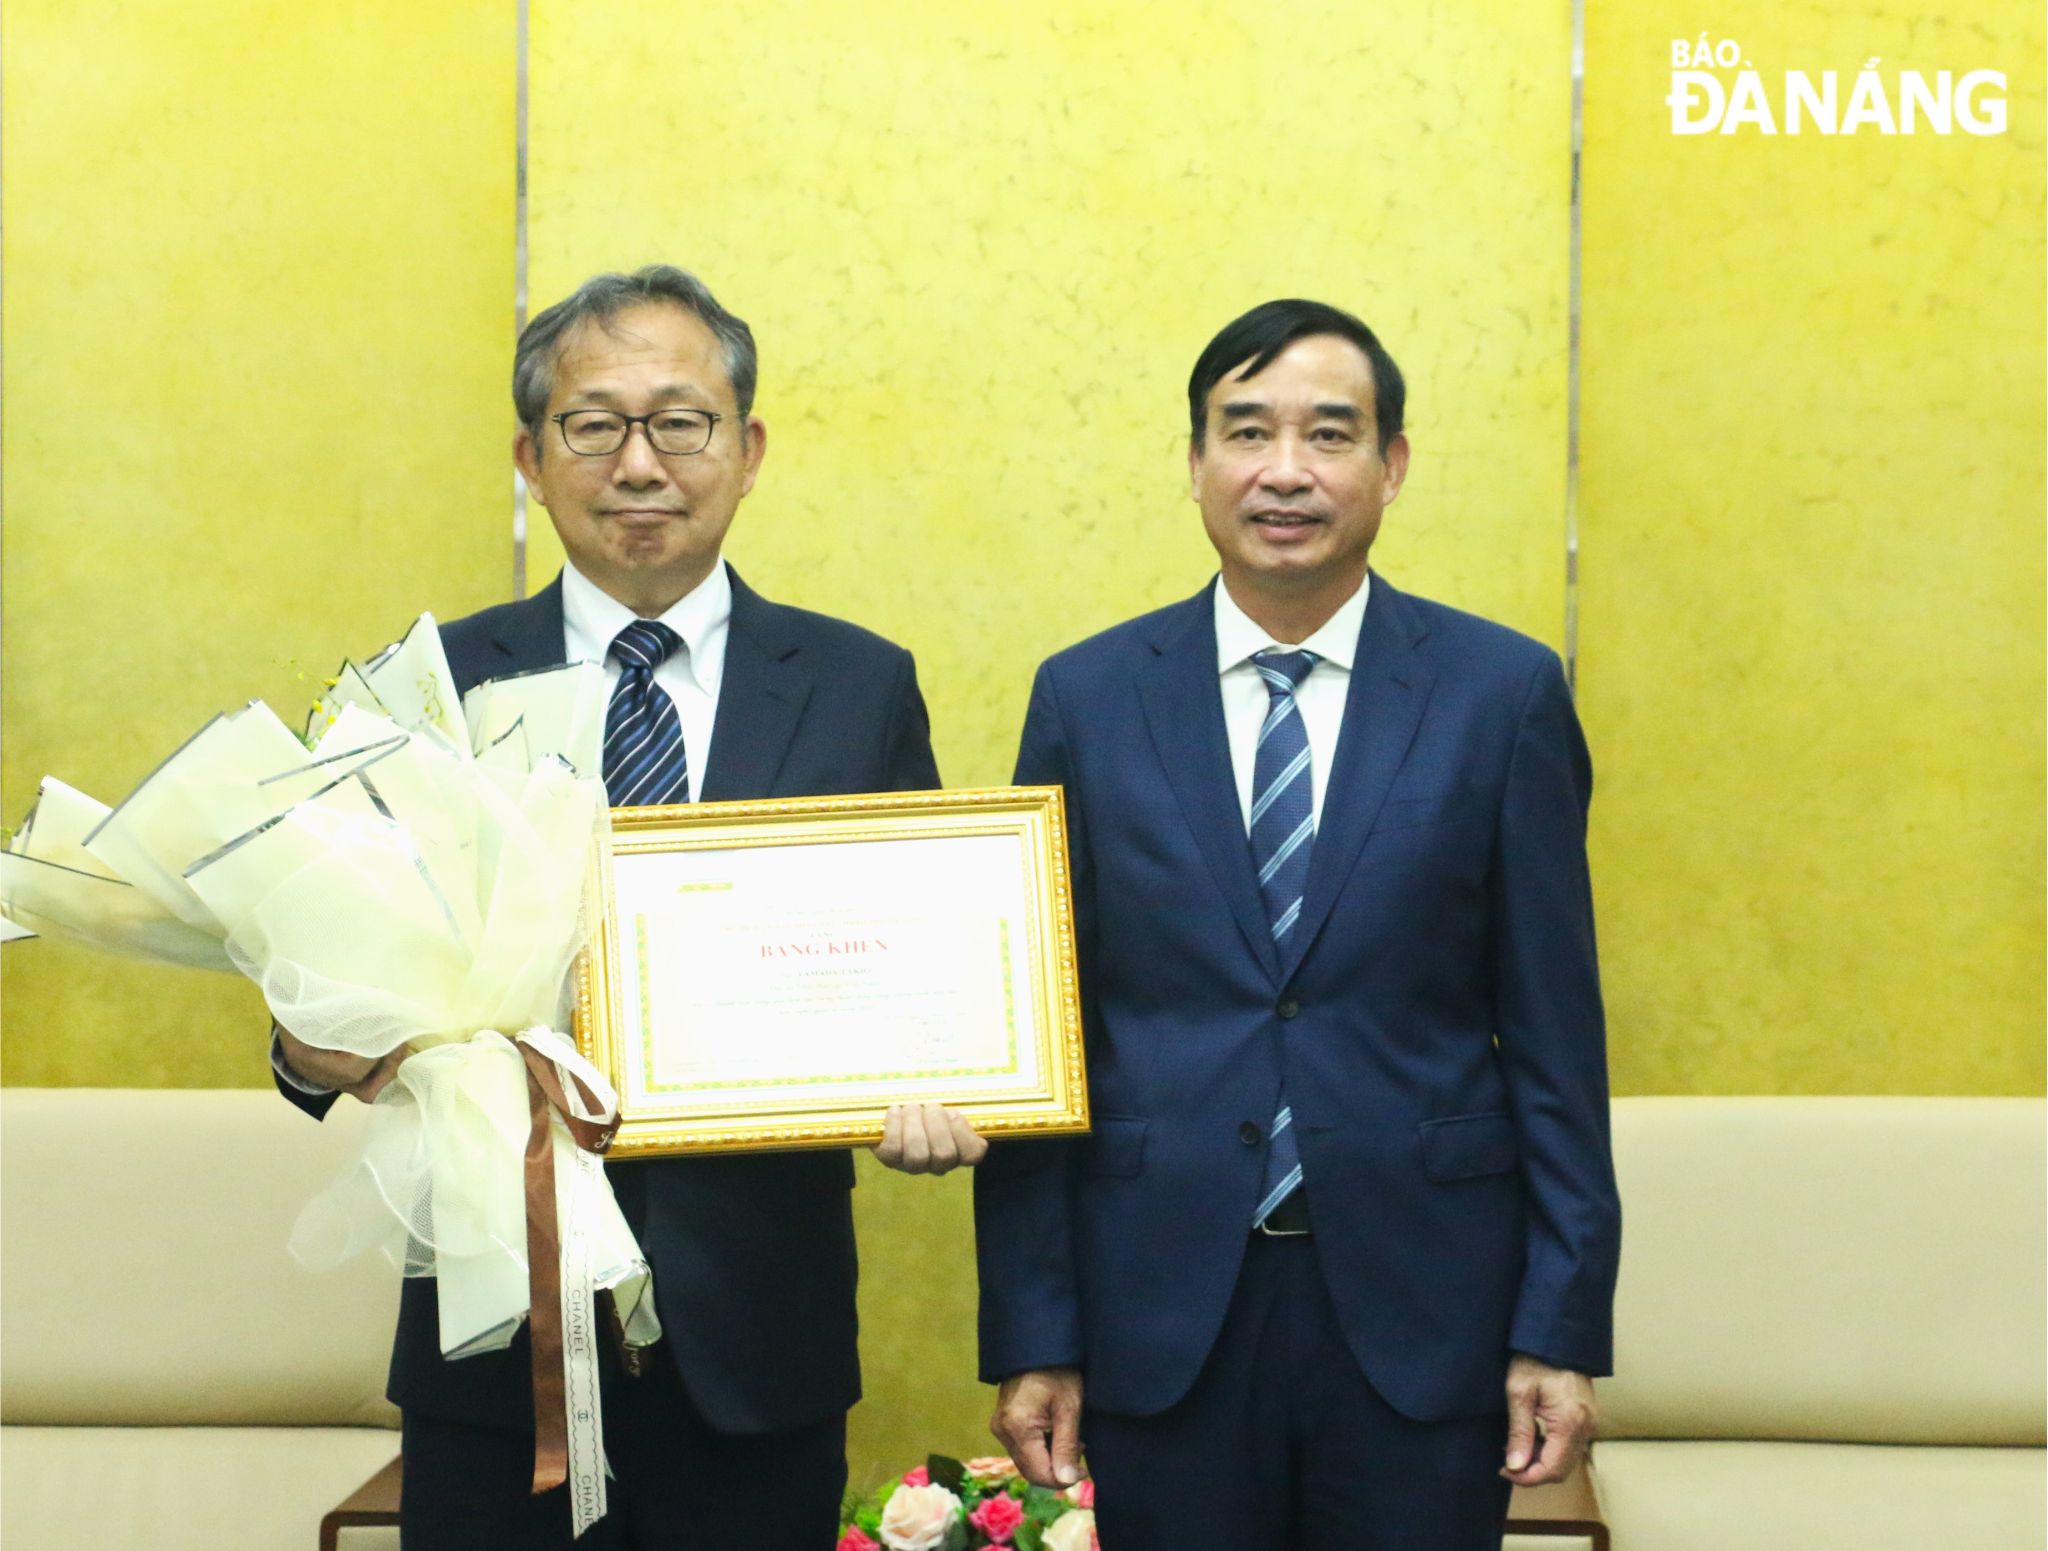  Da Nang People's Committee Chairman Le Trung Chinh (right) presents a certificate of merit to Japanese Ambassador to Viet Nam Yamada Takio. Photo: T.PHUONG